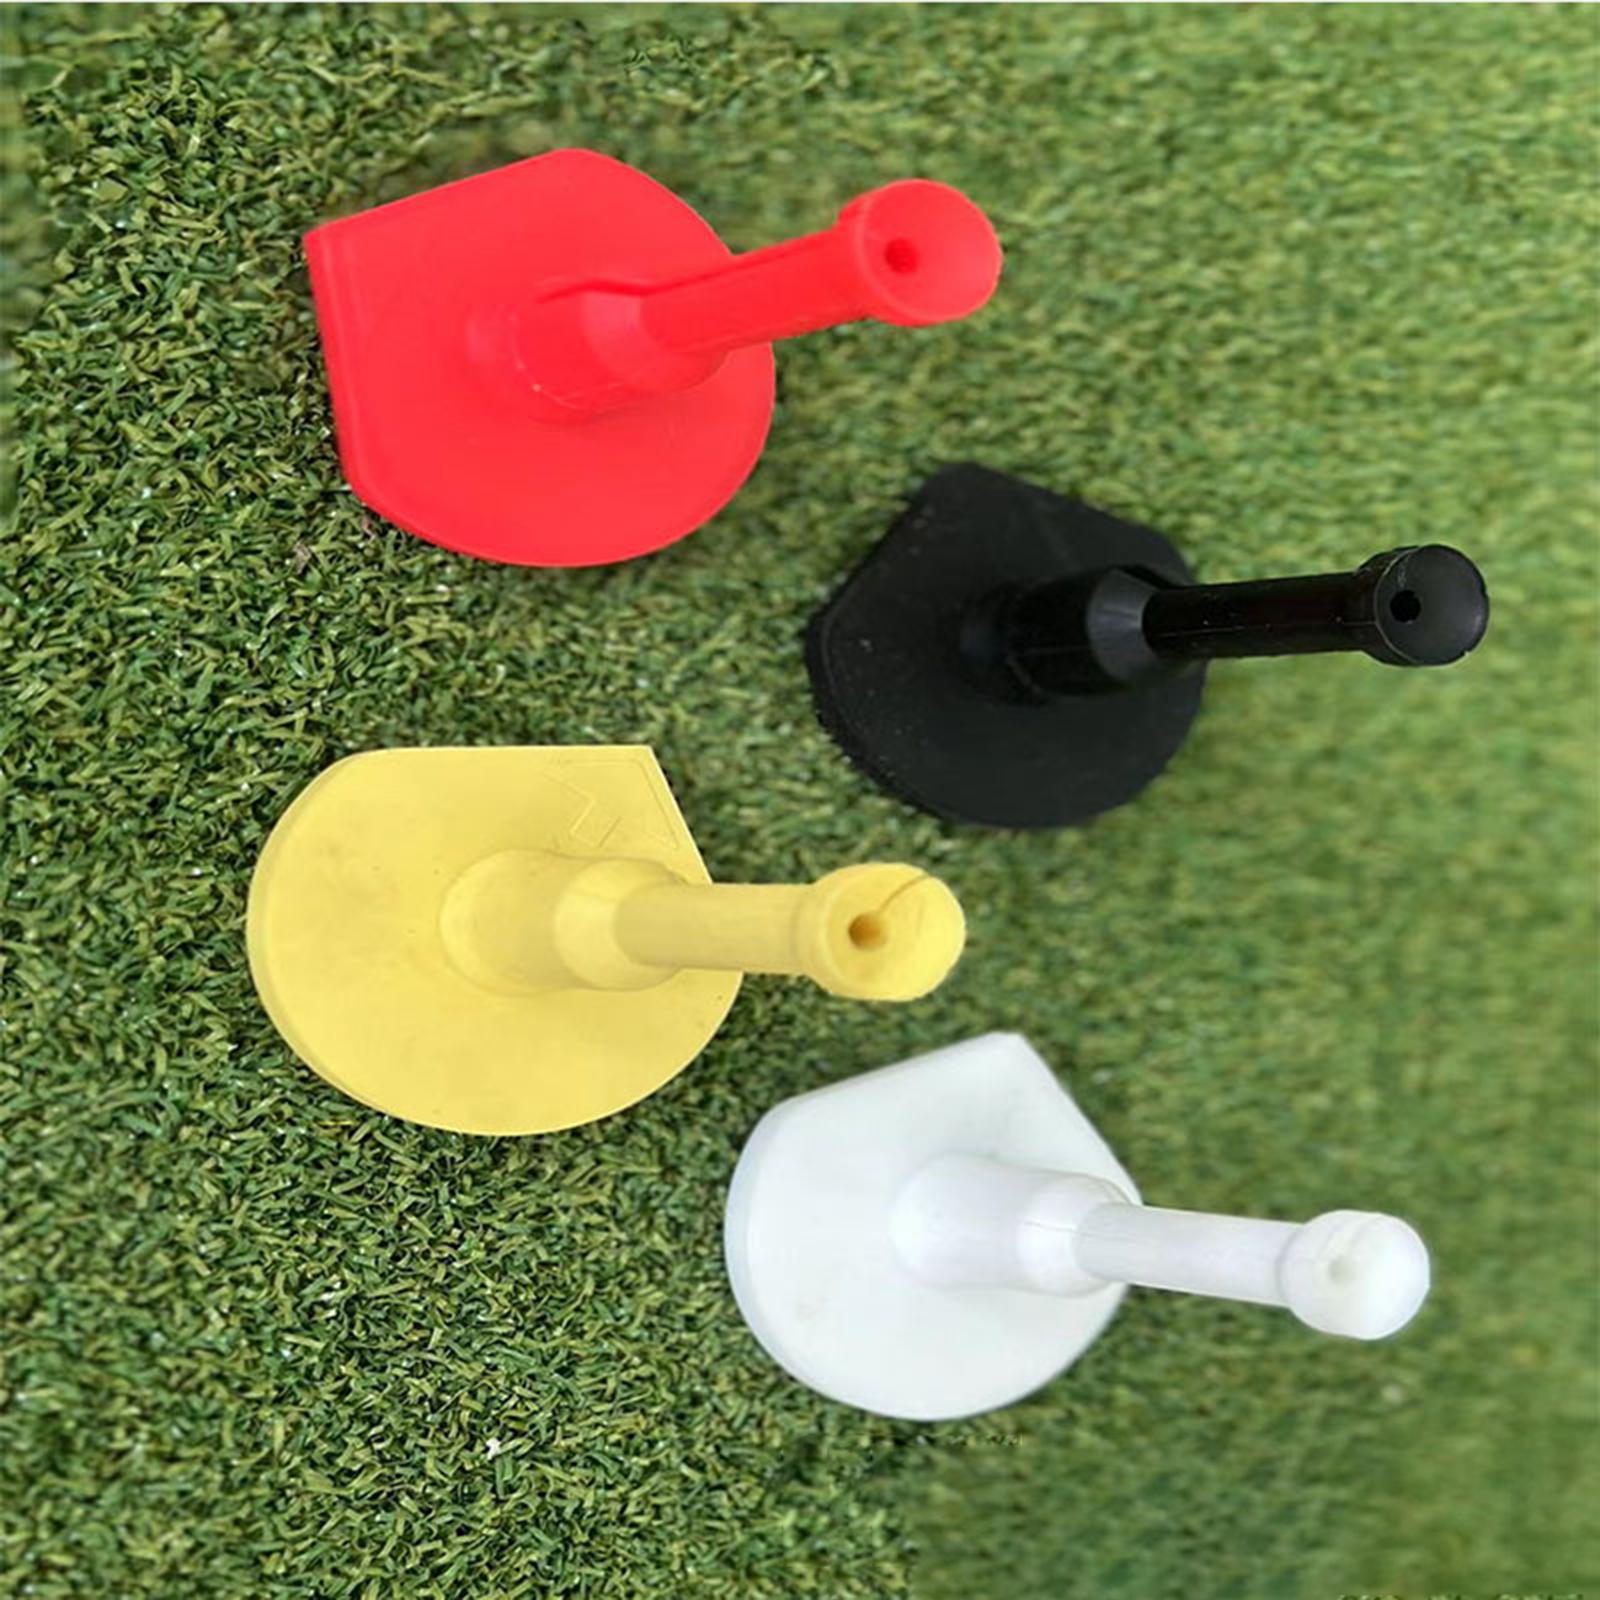 PVC Rubber Golf Tees Holder Portable Reusable Durable for Sports Accessories yellow